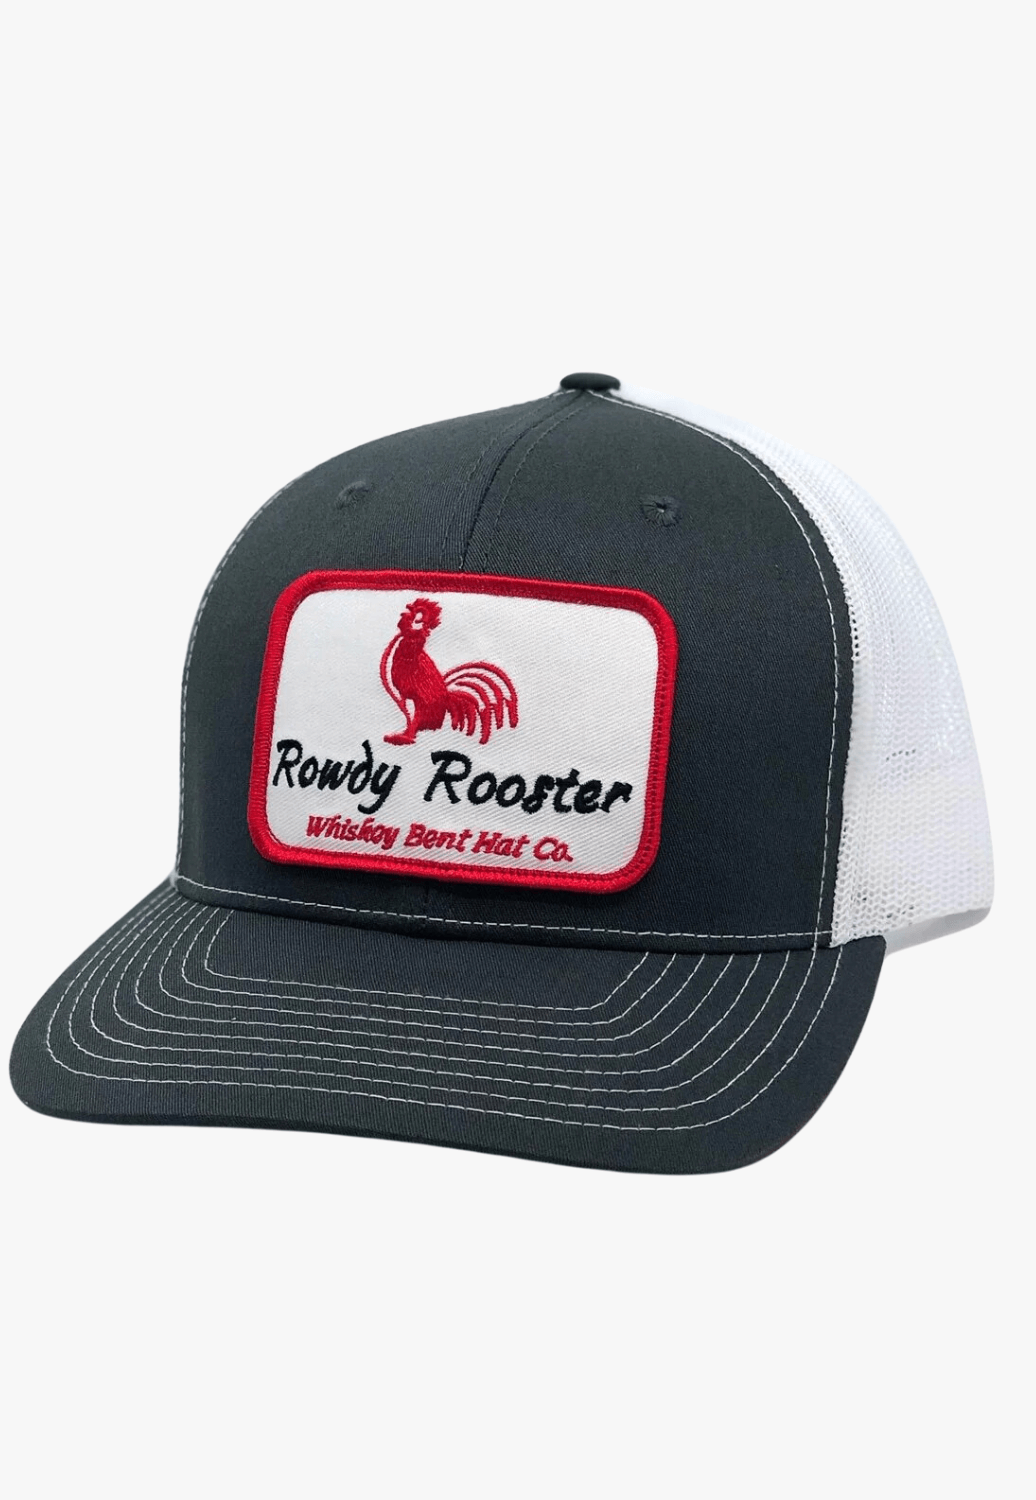 Whiskey Bent Hat Co Rowdy Rooster Trucker Cap